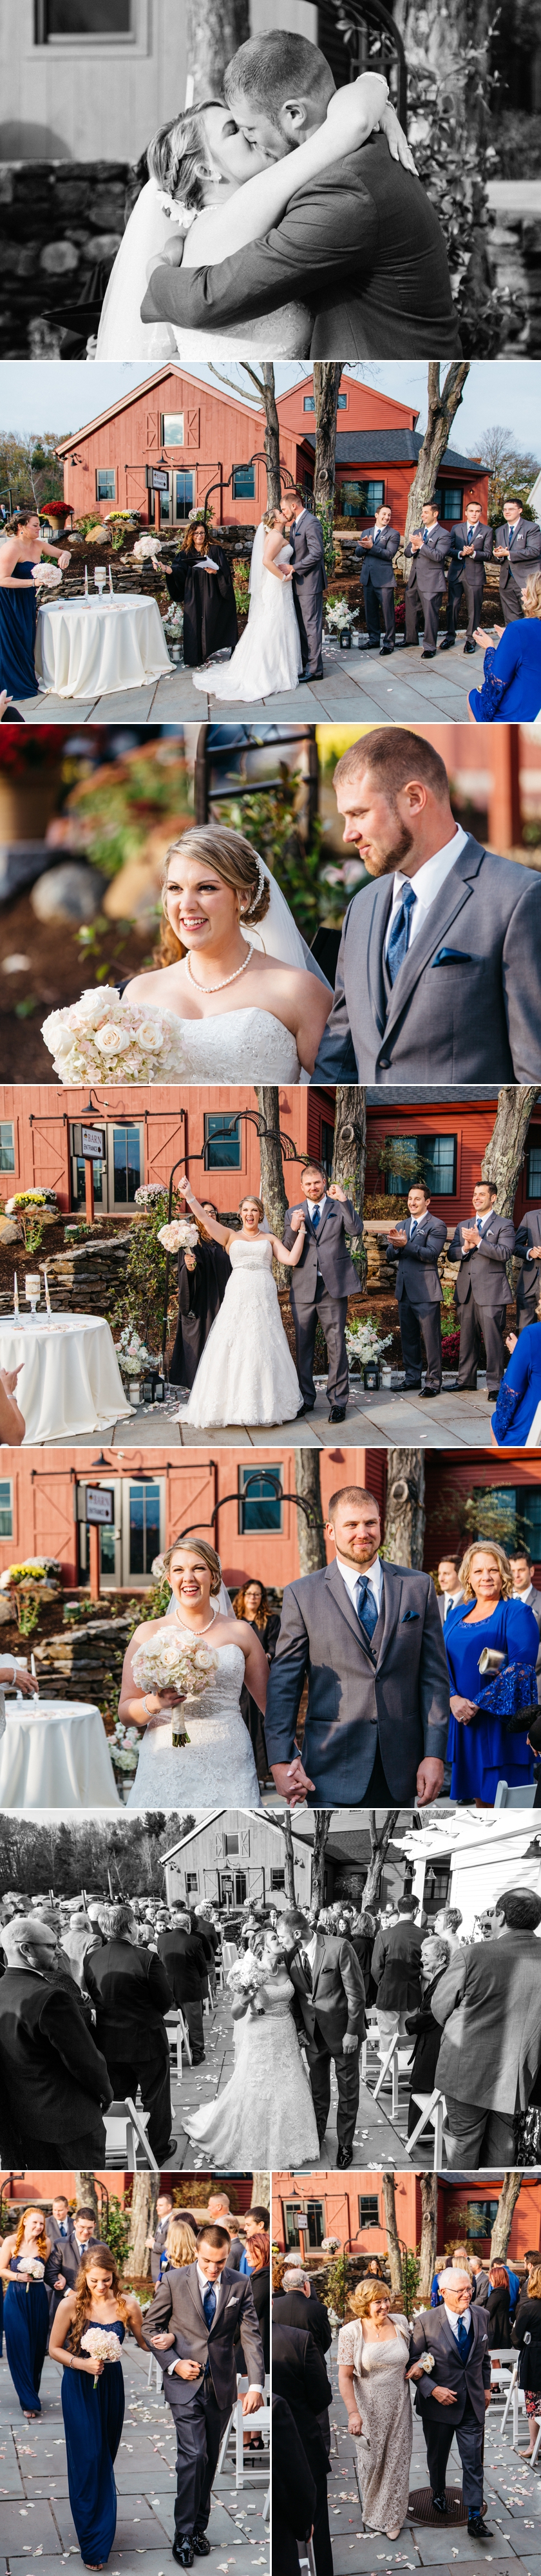 photo collage of end of ceremony at nichole and george's classic wedding at the wight barn in sturbridge massachusetts